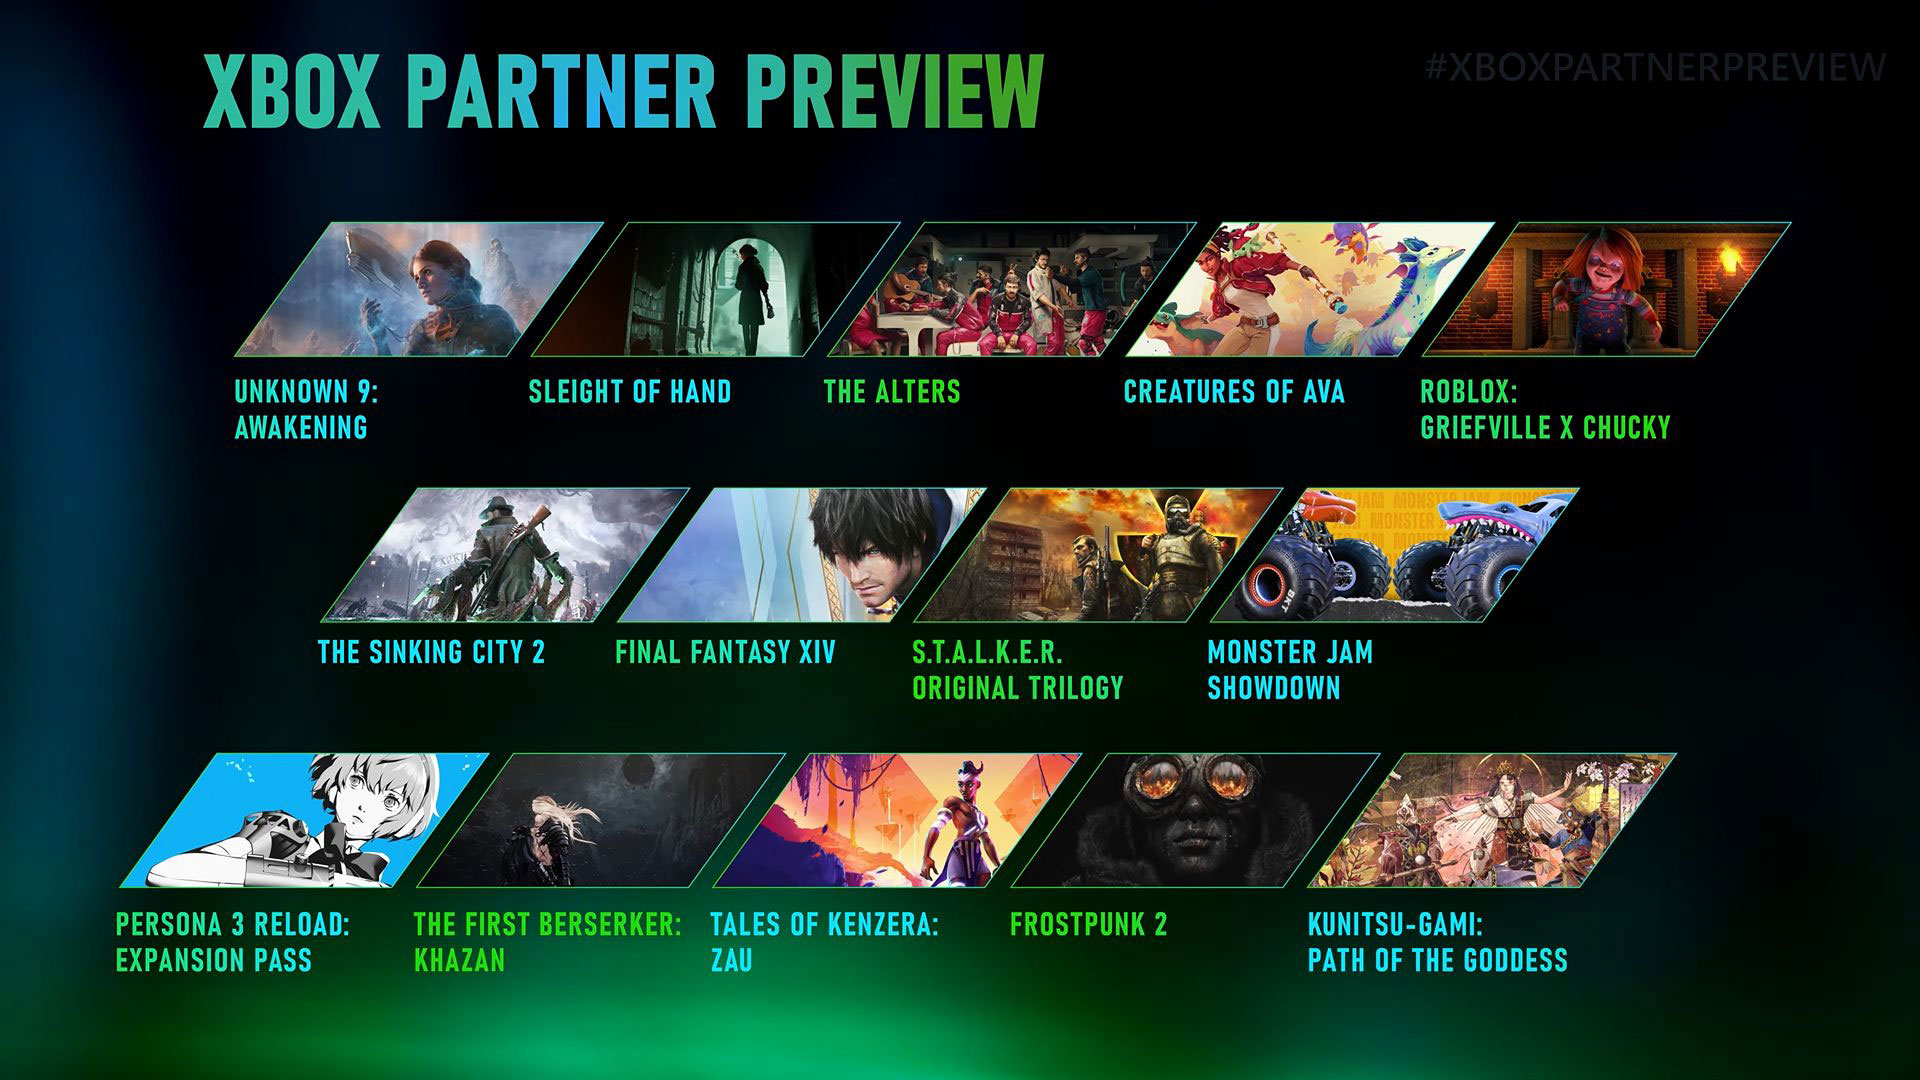 The Xbox Partner Preview featured 14 games coming to Xbox and Windows